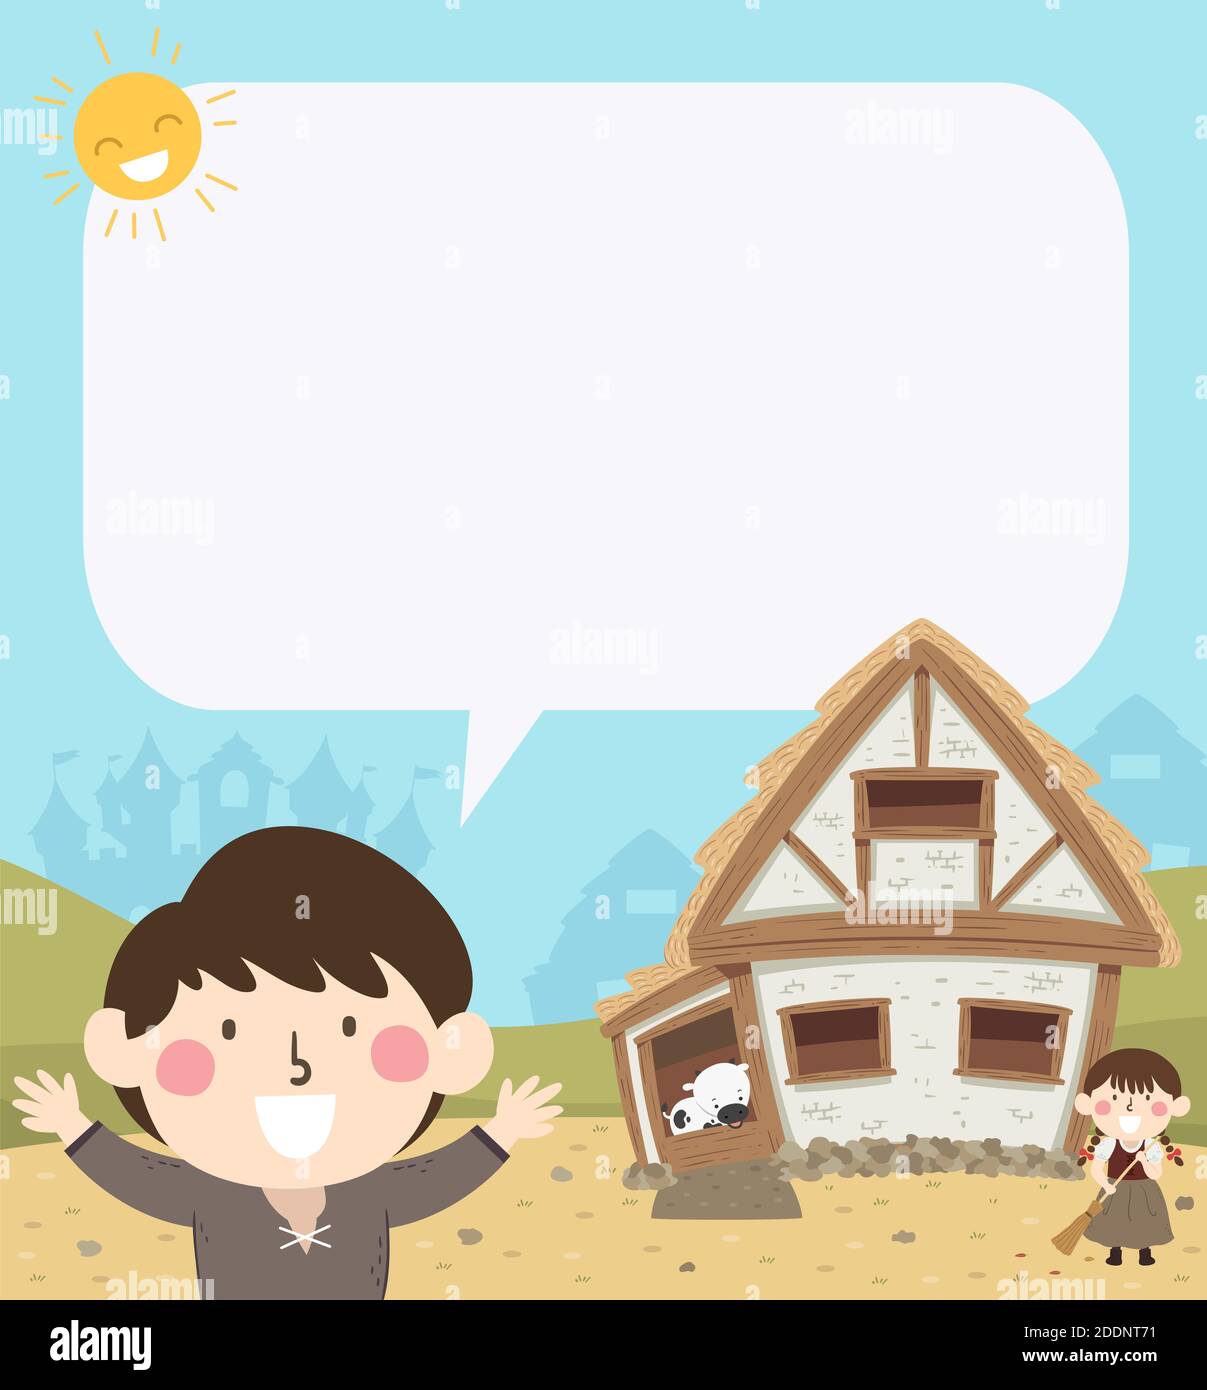 Illustration of a Kid Boy Medieval Peasant Talking with Blank Speech Bubble with a Barn with Cow and a Kid Girl Sweeping Stock Photo